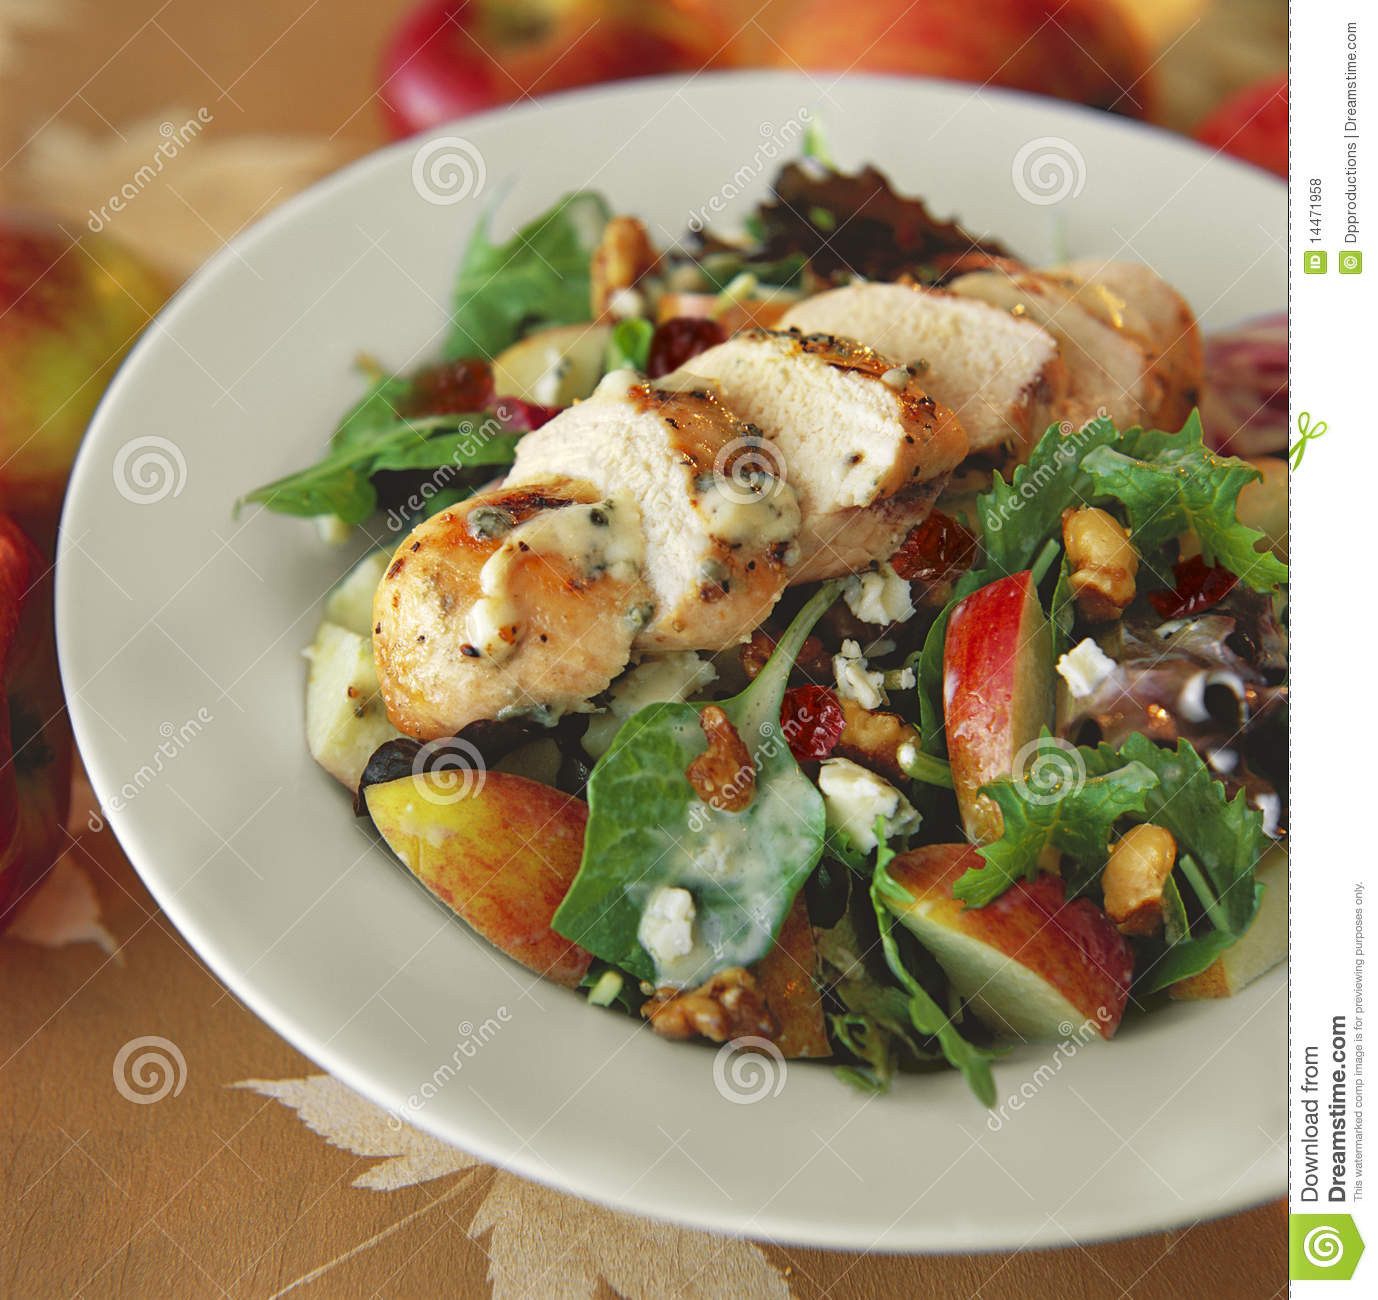 Gourmet Chicken Salad
 Gourmet Chicken Salad stock photo Image of healthy